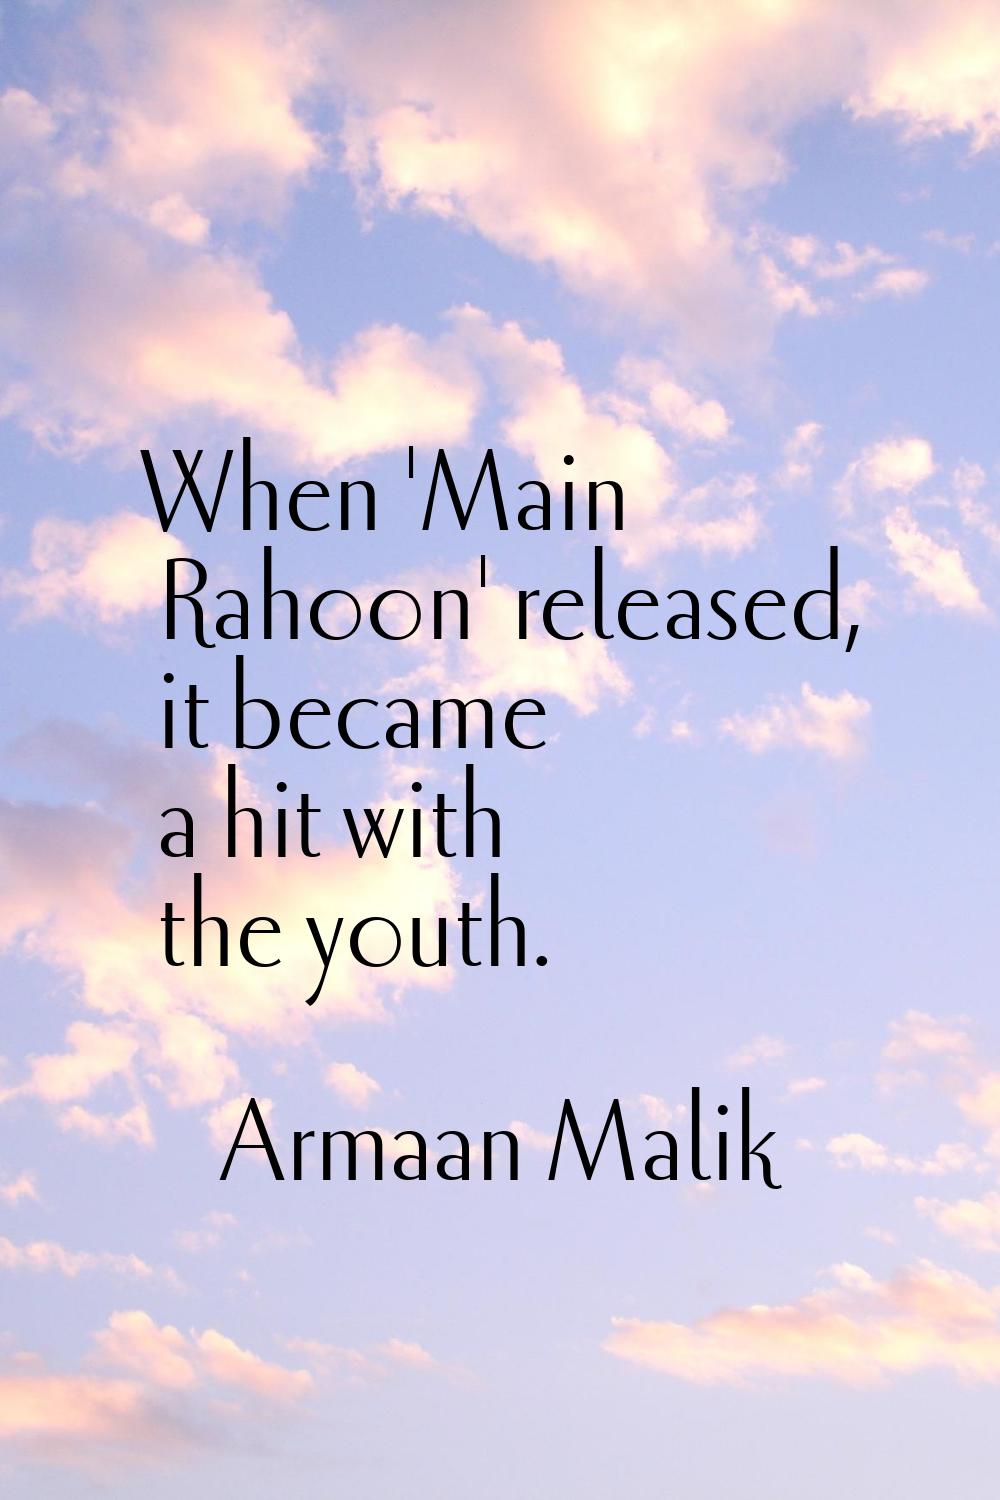 When 'Main Rahoon' released, it became a hit with the youth.